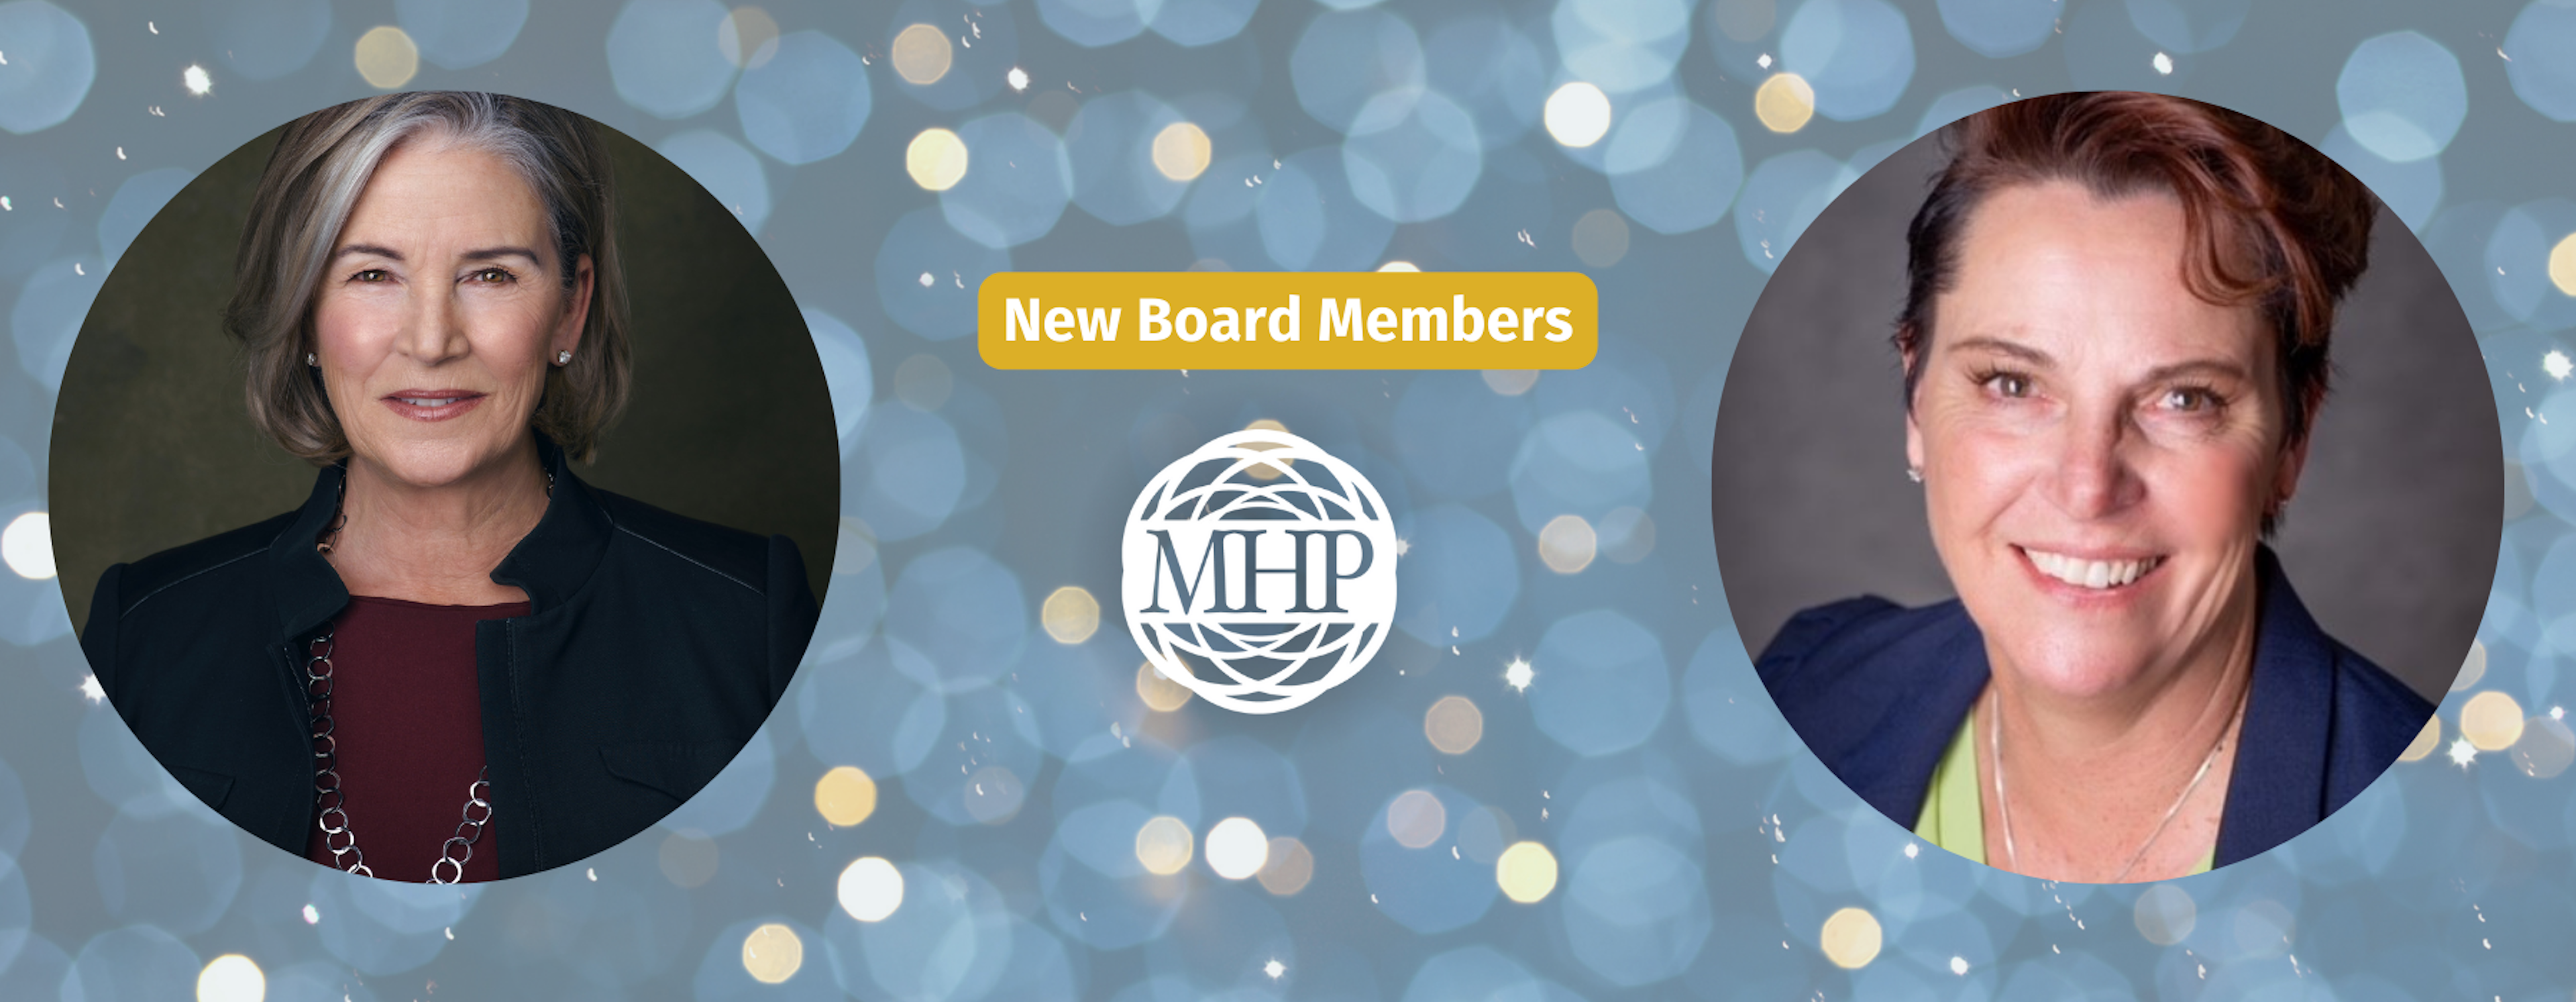 Mental Health Partners Welcomes Two New Board Members